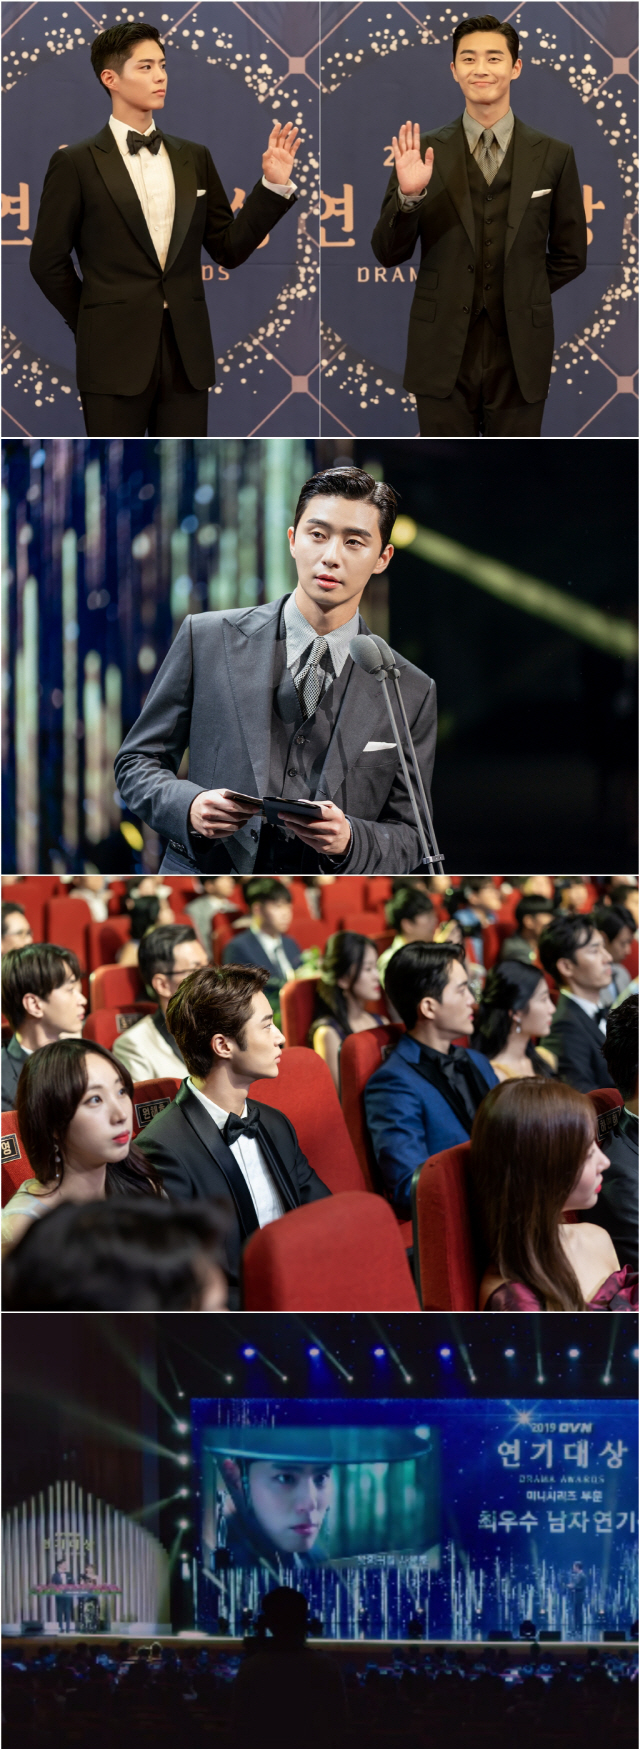 TVNs Wall Flower KBS Drama Special Youth Records (directed by An Gil-ho, playwright Ha Myung-hee, production fan entertainment, and Studio Dragon) unveiled the spectacular year-end awards ceremony on June 6, just before the second season.  In addition to Park Bo-gum, who is on the red carpet in the spotlight, park Seo-joon, who appears as his predecessor and top star Song Min-so, raises expectations.Sahye-jun, struggling to achieve his dream, opened the Shusu flower path.  Despite the ploy of his former company, Lee Tae-soo (Lee Chang-hoon), Hye-jun Sa hye-jun was a rising star by appearing in the medical KBS Drama Special Gateway with top star Lee Hyun-so.  The romance between Sahye-jun and Seung-ha (Park So-dam) who pledged constant love in the midst of a busy life added excitement.  There were still crises on days when everything seemed to be fine.  Two young men who were moving toward tomorrow without being frustrated by the reality.  There are growing questions about whether we can protect our dreams and love in the face of different realities and many variables.Meanwhile, the dazzling visuals of Sahye-jun, who attended the acting awards ceremony, catch the eye in the photos released.  The unique aura of Sahye-juns model predecessor and top star Song Min-so (Park Seo-joon) also excites.  It is also interesting to see the tense expressions of Won Hae-hyo (Woo Woo-suk) and Park Do-ha (Kim Kun-woo) waiting for the best male actor award to be announced.  The result is a question of who will be the best male actor, and whether Song Min-so, who has a special relationship with Sahye-jun, can win the trophy to Sahye-jun.In the ninth episode, which airs on May 5, Sahye-jun is portrayed as an actress.  Earlier, Sahye-jun announced that he wanted to play The Return of the King, a historical drama with a work instead of the kbs drama special, a romance that was guaranteed to be popular in the next installment.  His move as a rising star adds to his expectations.  The Youth records crew is at the beginning of The Hye-Juns era.  In particular, Park Seo-joon has made a special appearance and the second act is hotter.  We look forward to his performance, which will add to the power of disassembly with top star Song Min-so, who has a special relationship with Sahye-jun.The ninth episode of Youth Records airs on May 5 at 9 p.m.